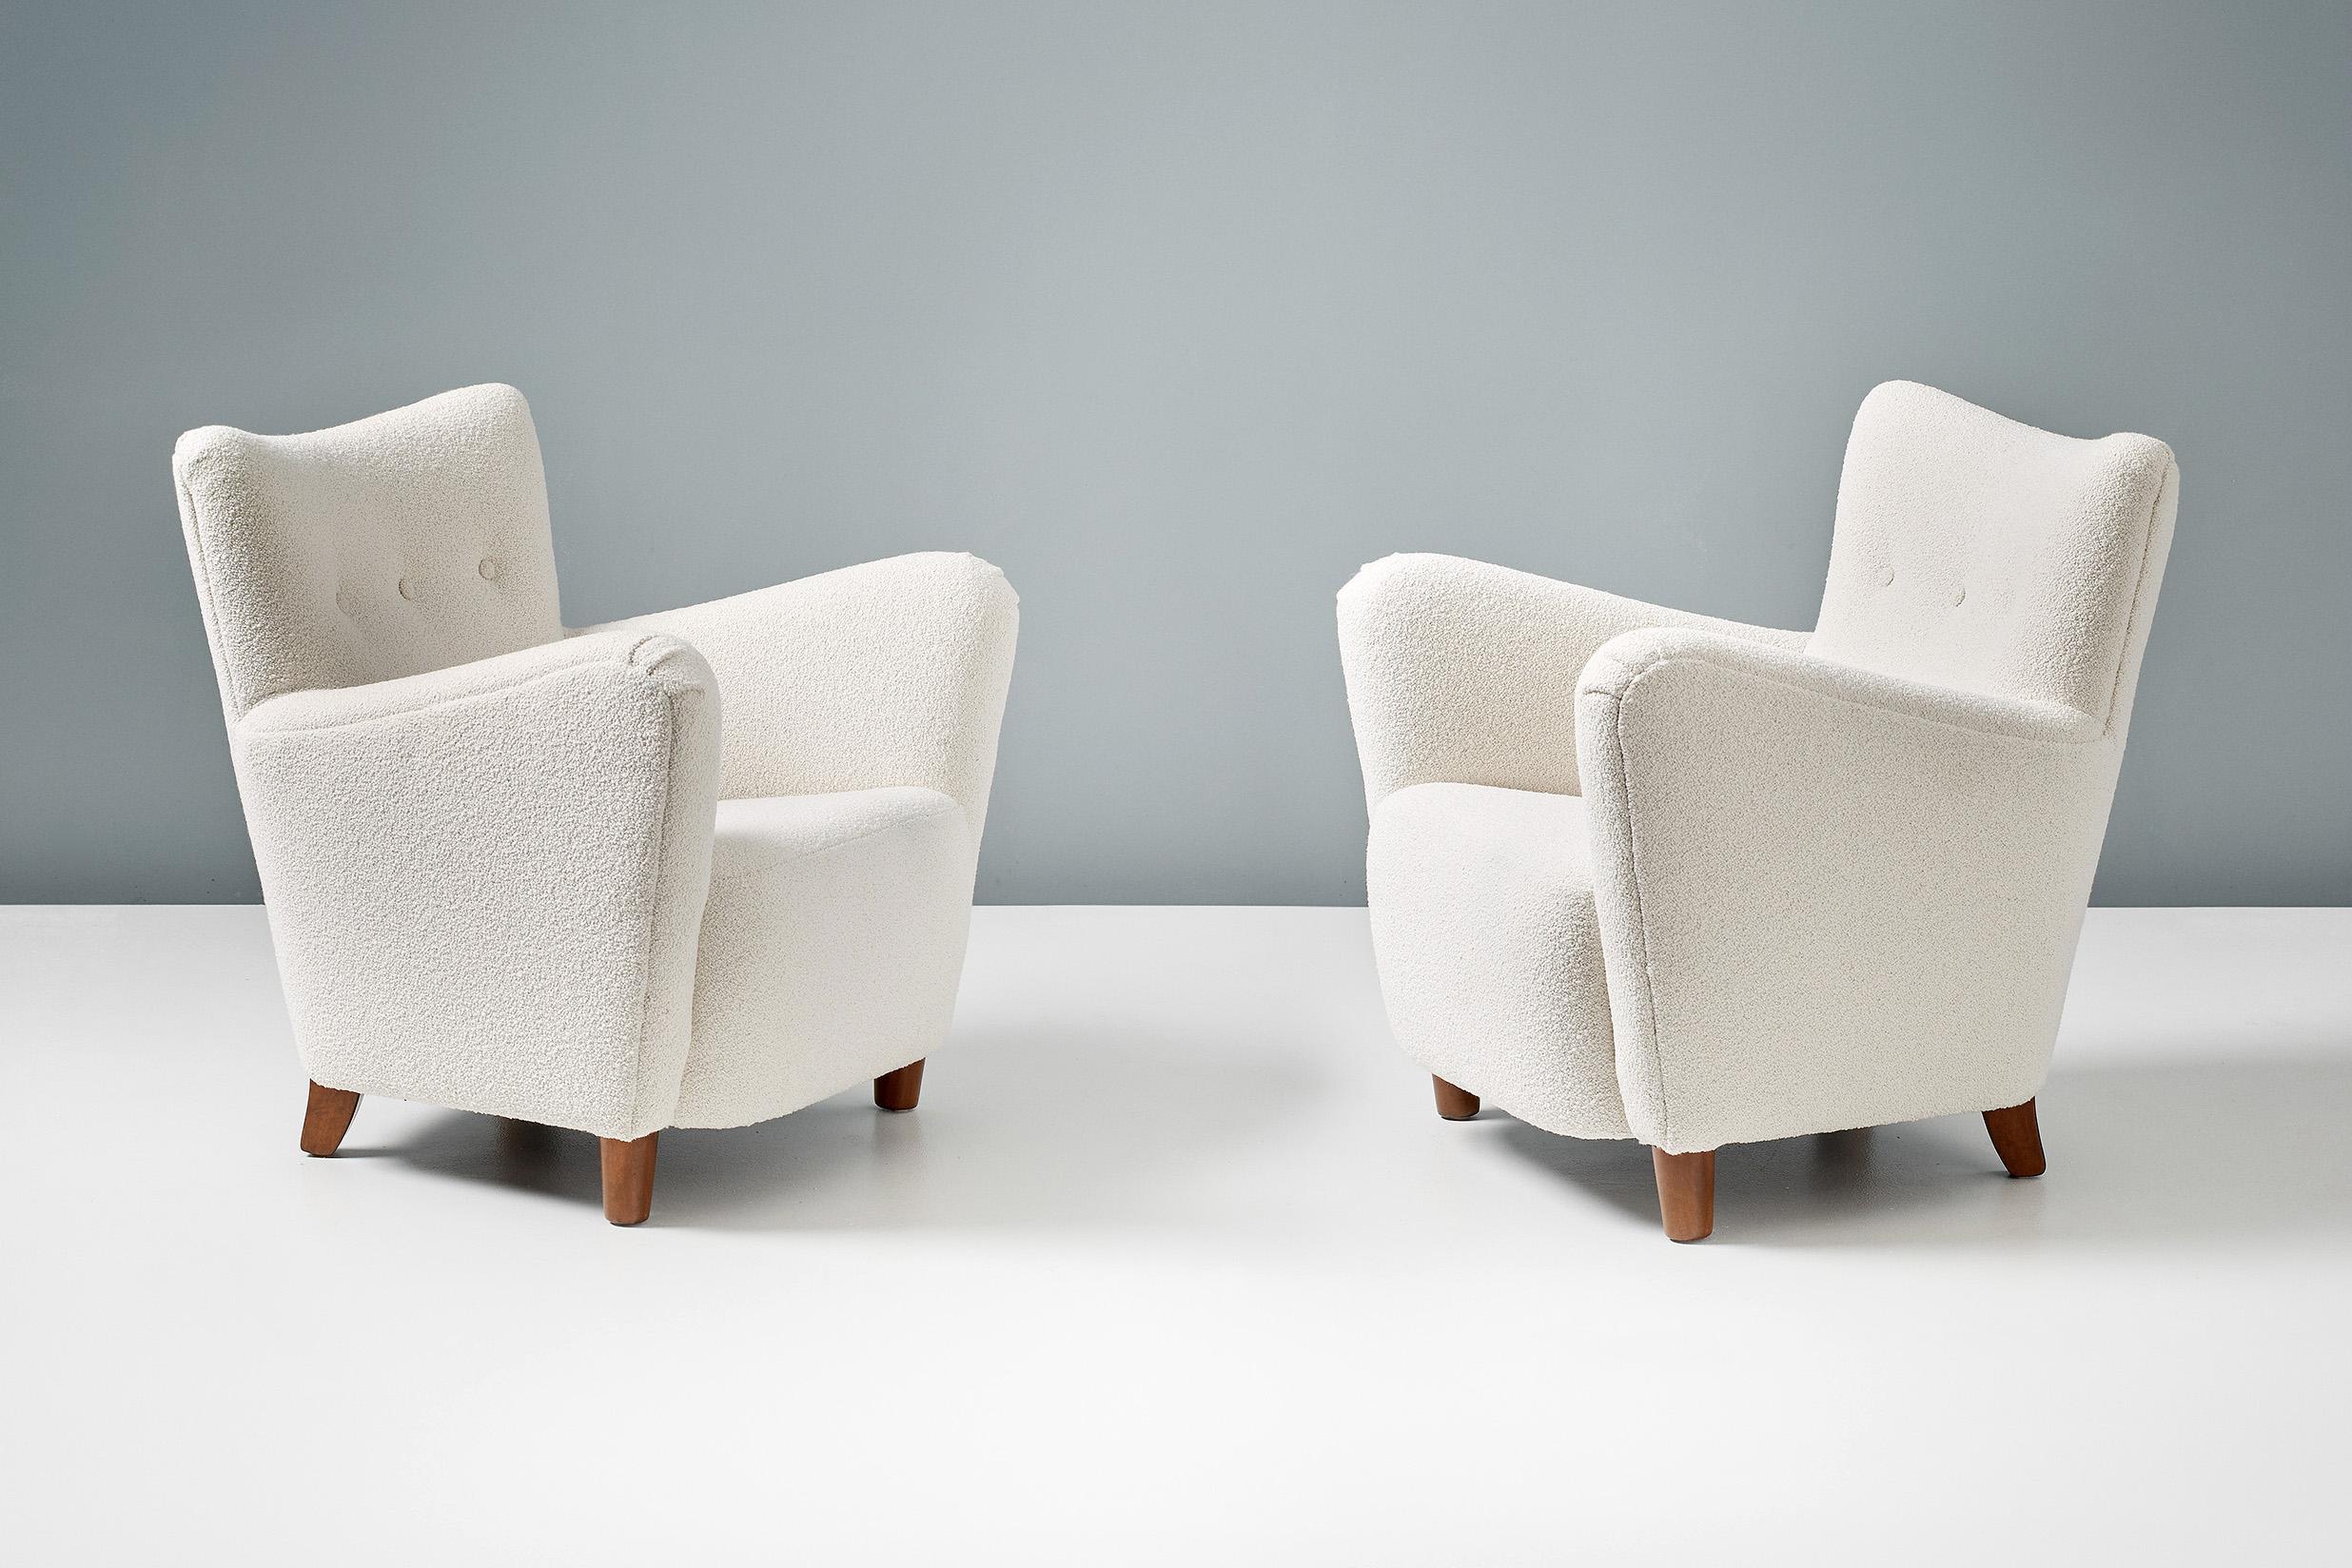 A pair of Danish cabinetmaker 1950s lounge chairs reupholstered in luxurious cotton-wool blend off-white bouclé fabric from Chase Erwin in England.

This pair of chairs were made in Denmark in the 1950s in the manner of Fritz Hansen. The legs are